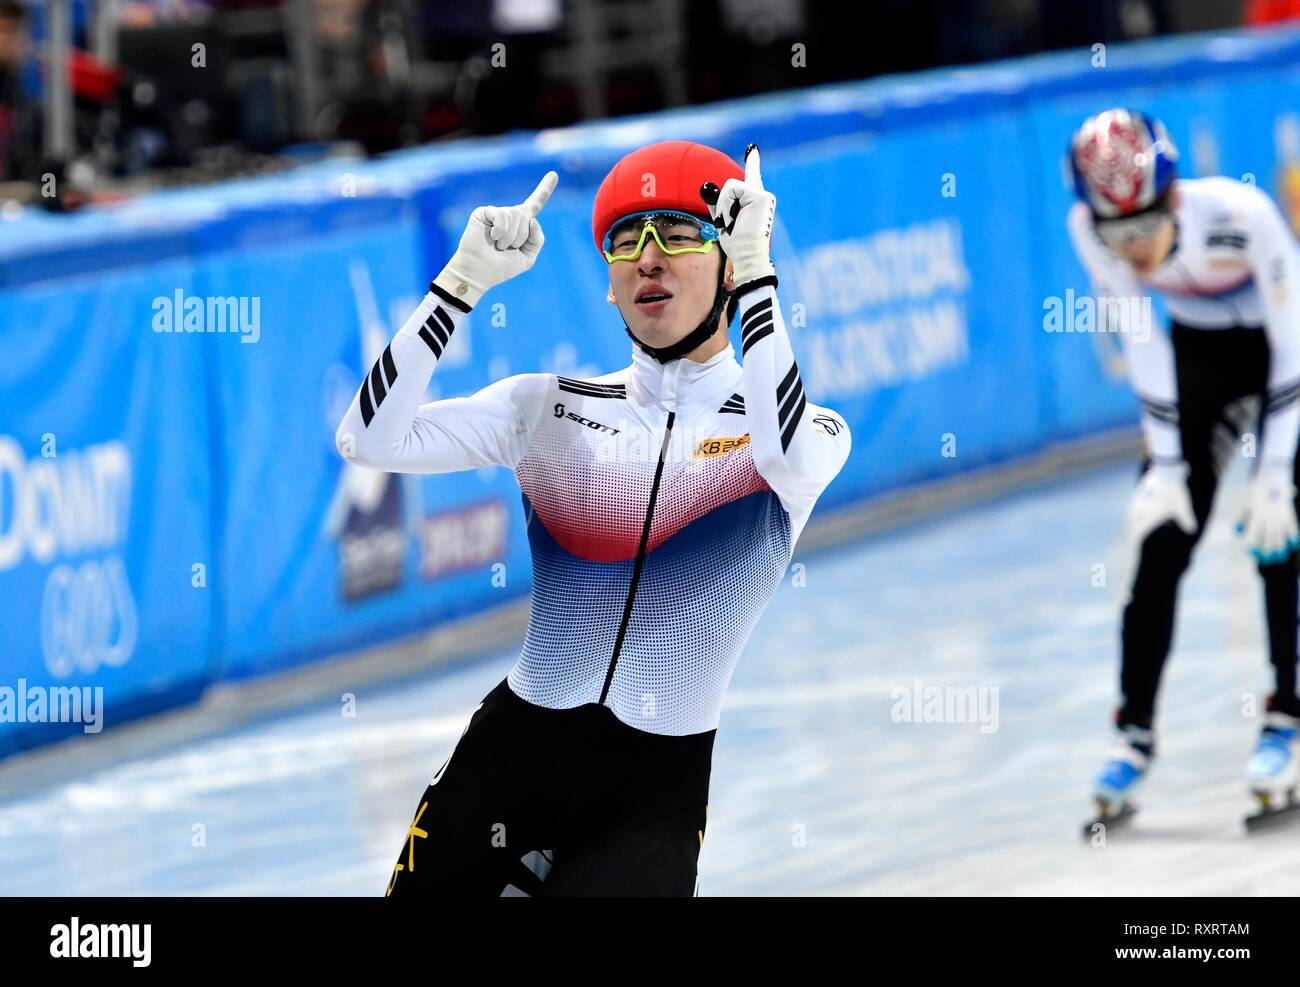 ISU Short Track World Championships on March 10 2019 at the Arena Armeec in Sofia, Bulgaria. Hyo Jun LIM (KOR) wins the Superfinal. Credit: Soenar Chamid/SCS/AFLO/Alamy Live News Stock Photo